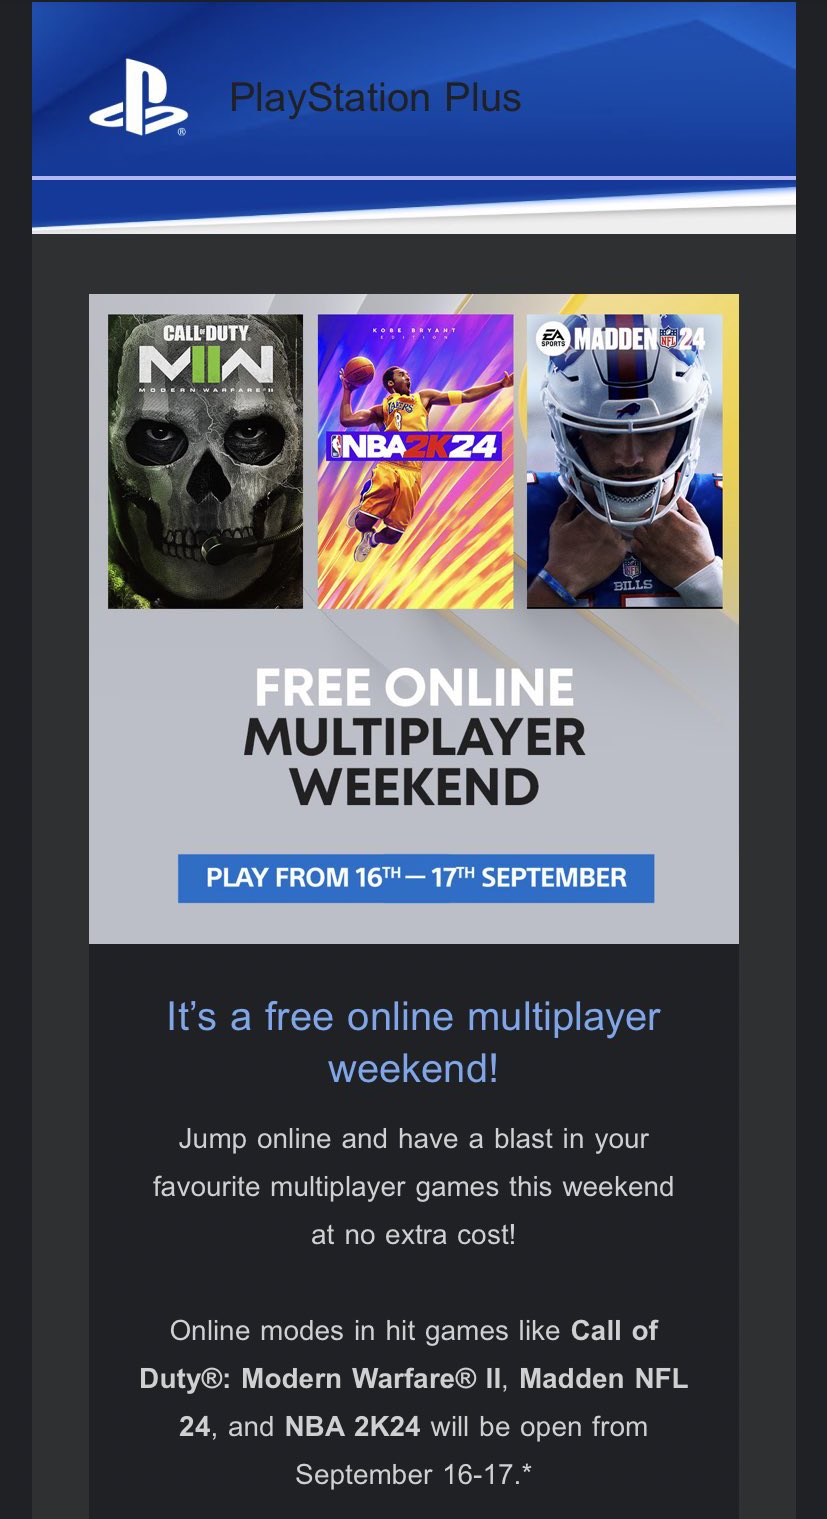 PlayStation Plus is having a free online multiplayer weekend from